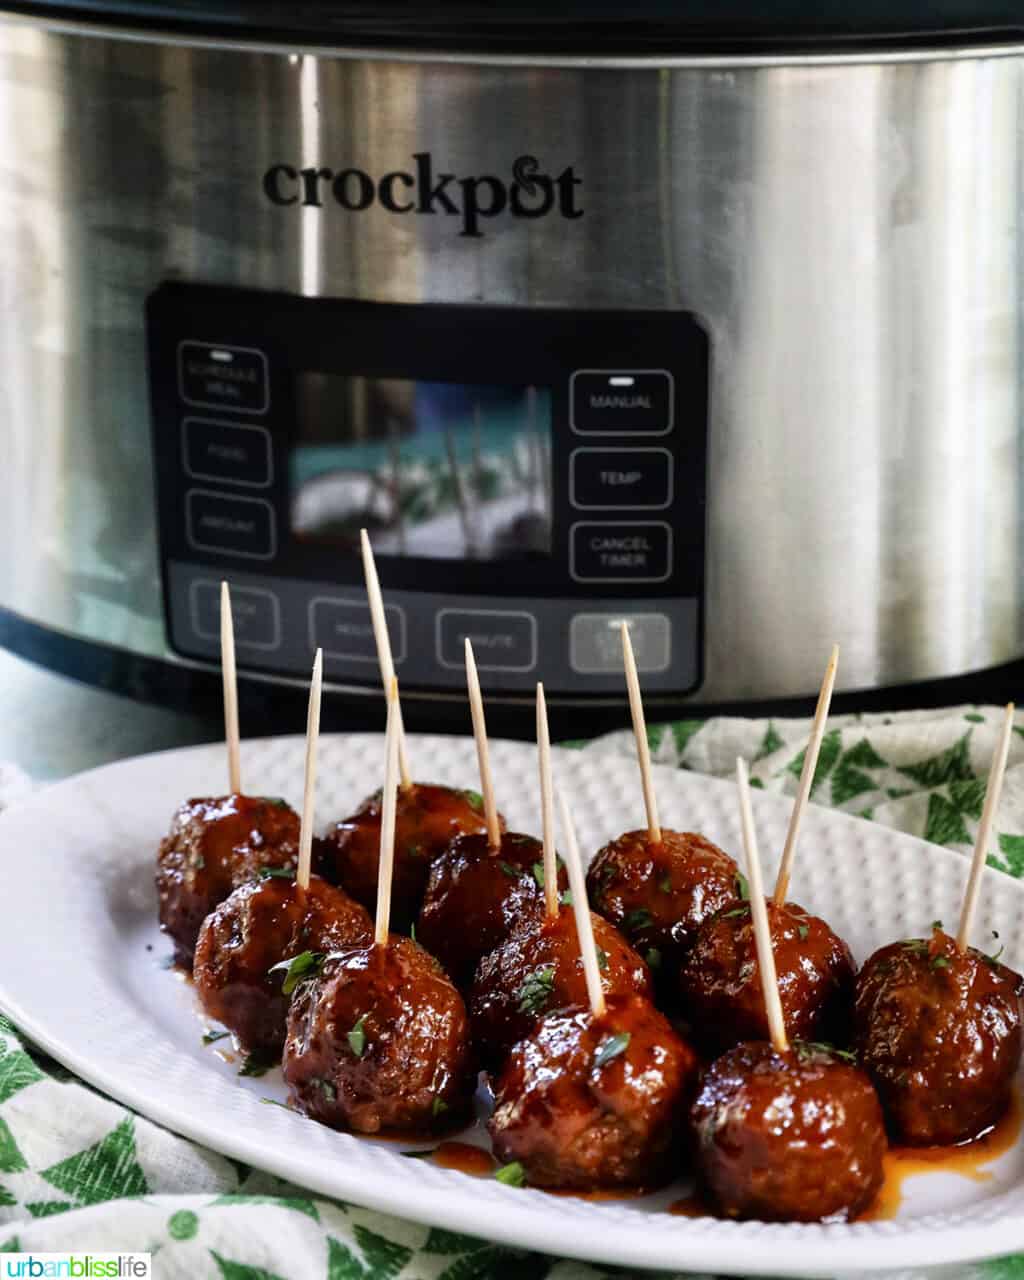 white plate with several honey bourbon meatball appetizers with toothpicks, and a crockpot slow cooker behind the plate.